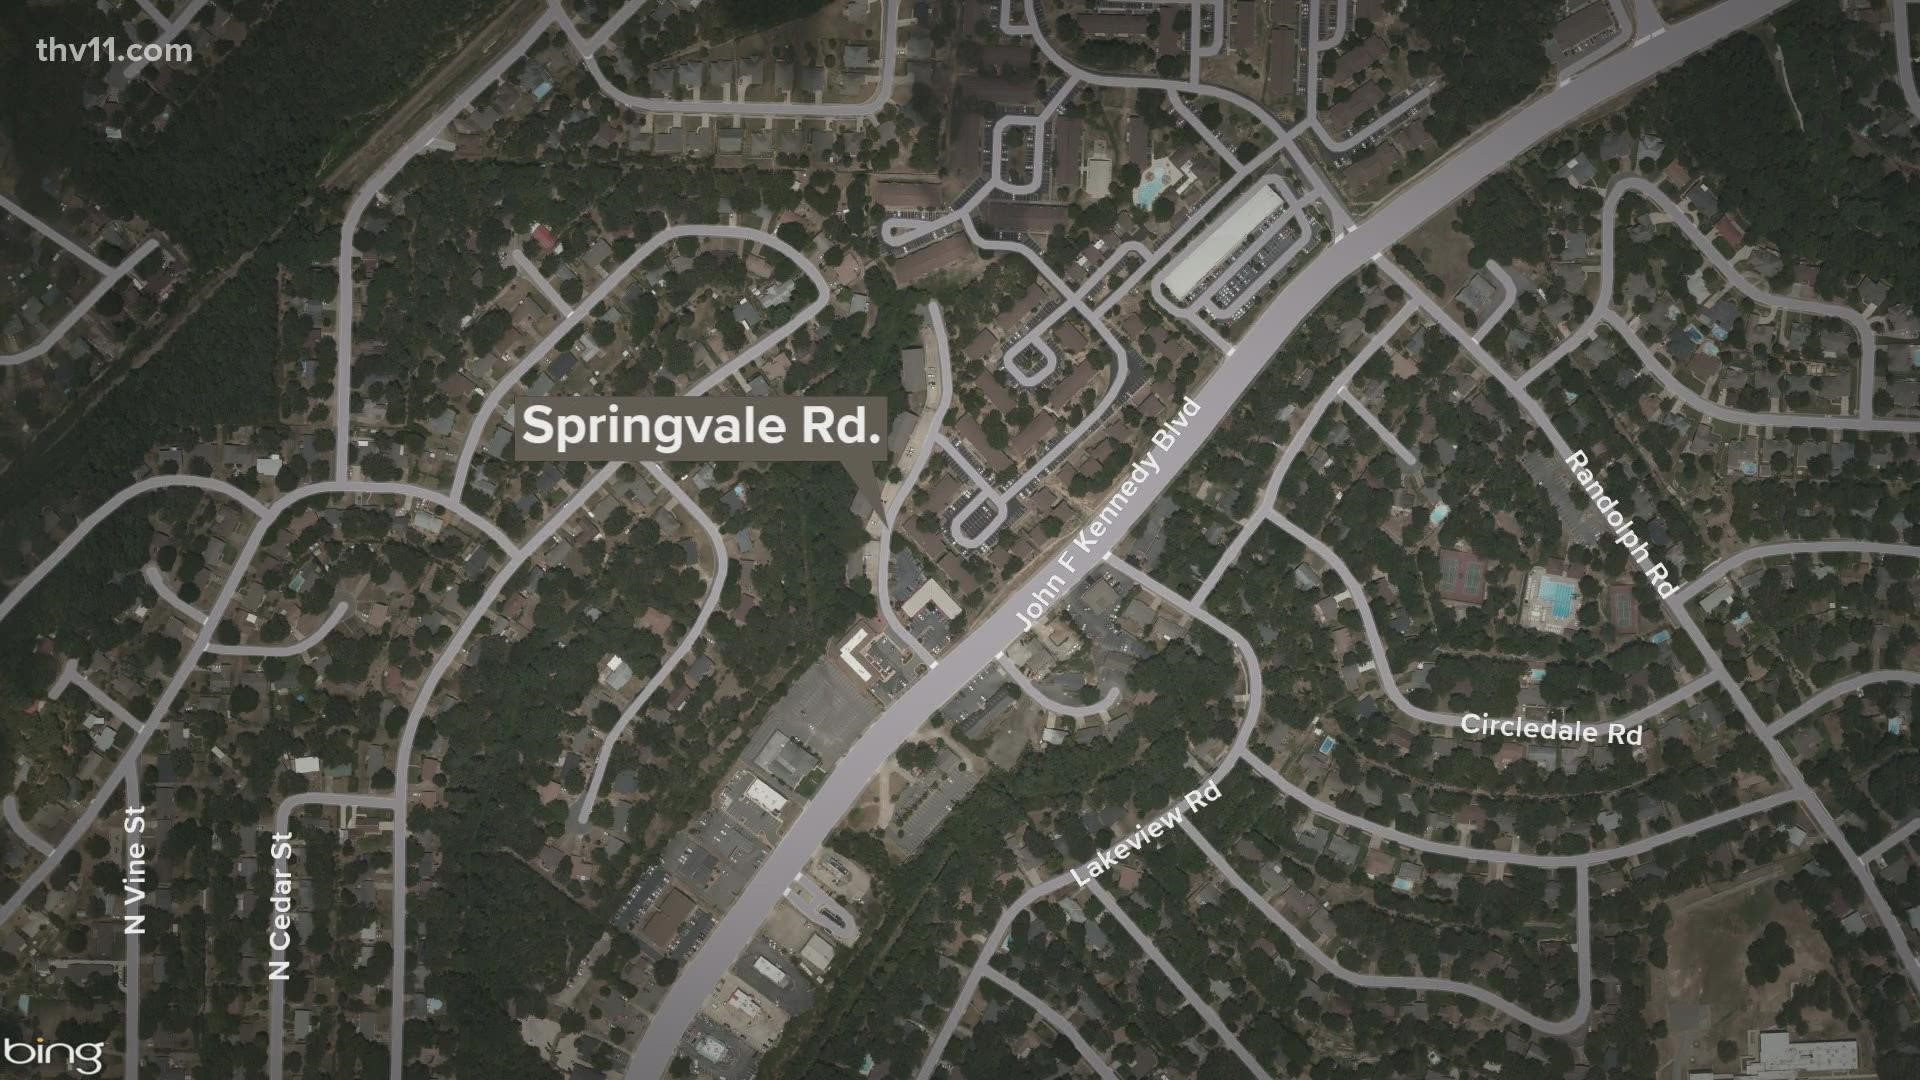 North Little Rock police officers found someone shot inside a vehicle on Springvale Road overnight.